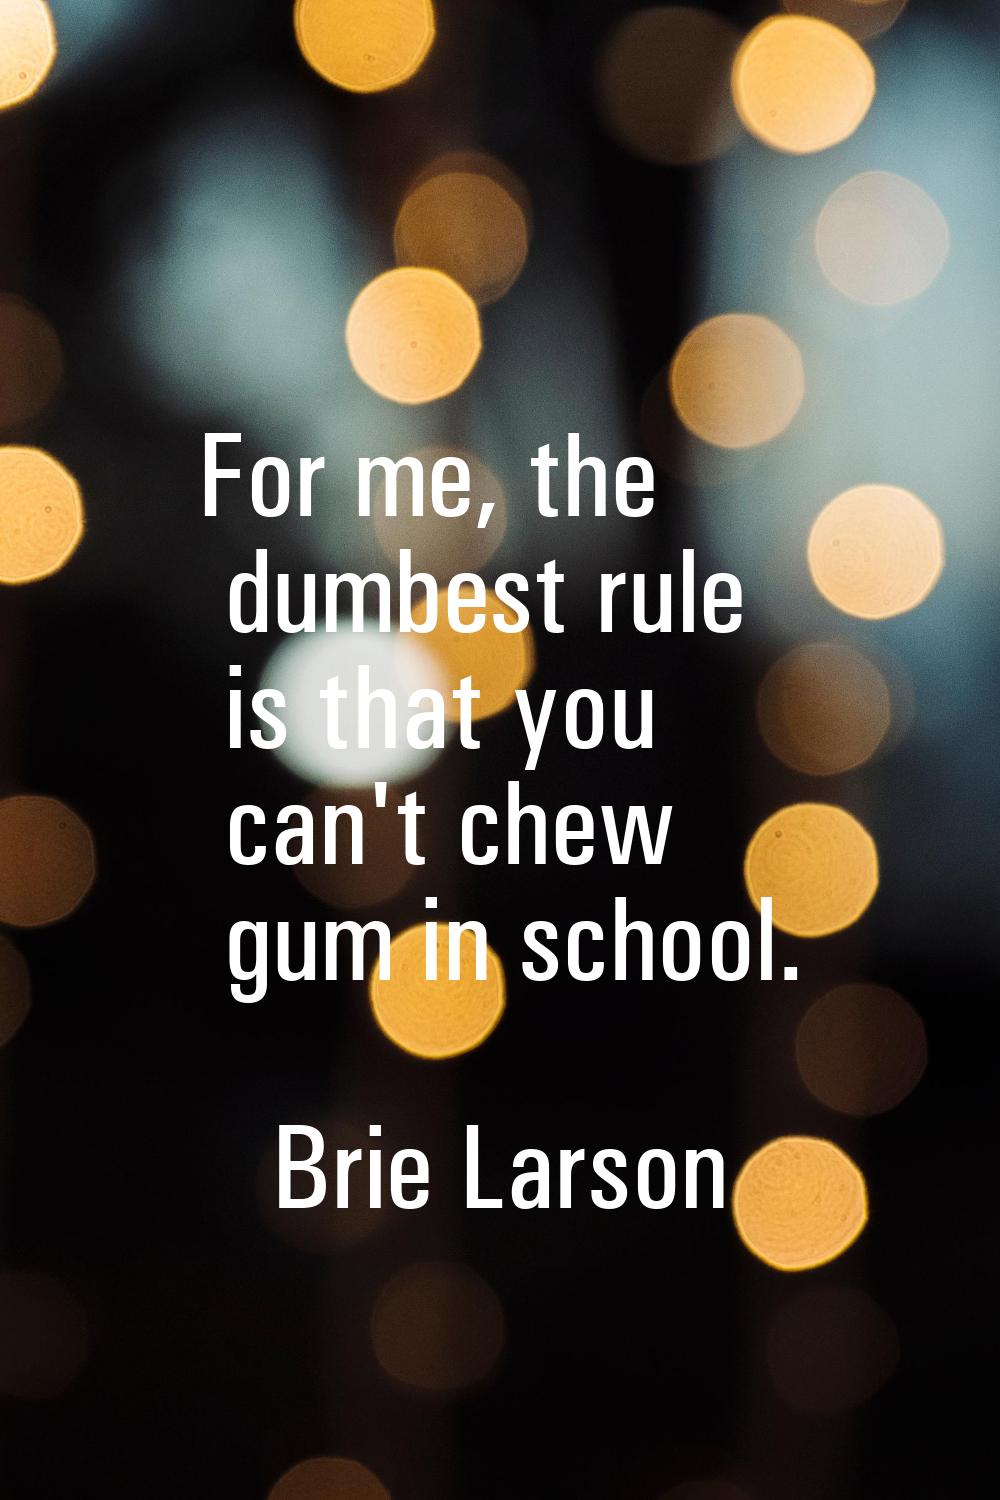 For me, the dumbest rule is that you can't chew gum in school.